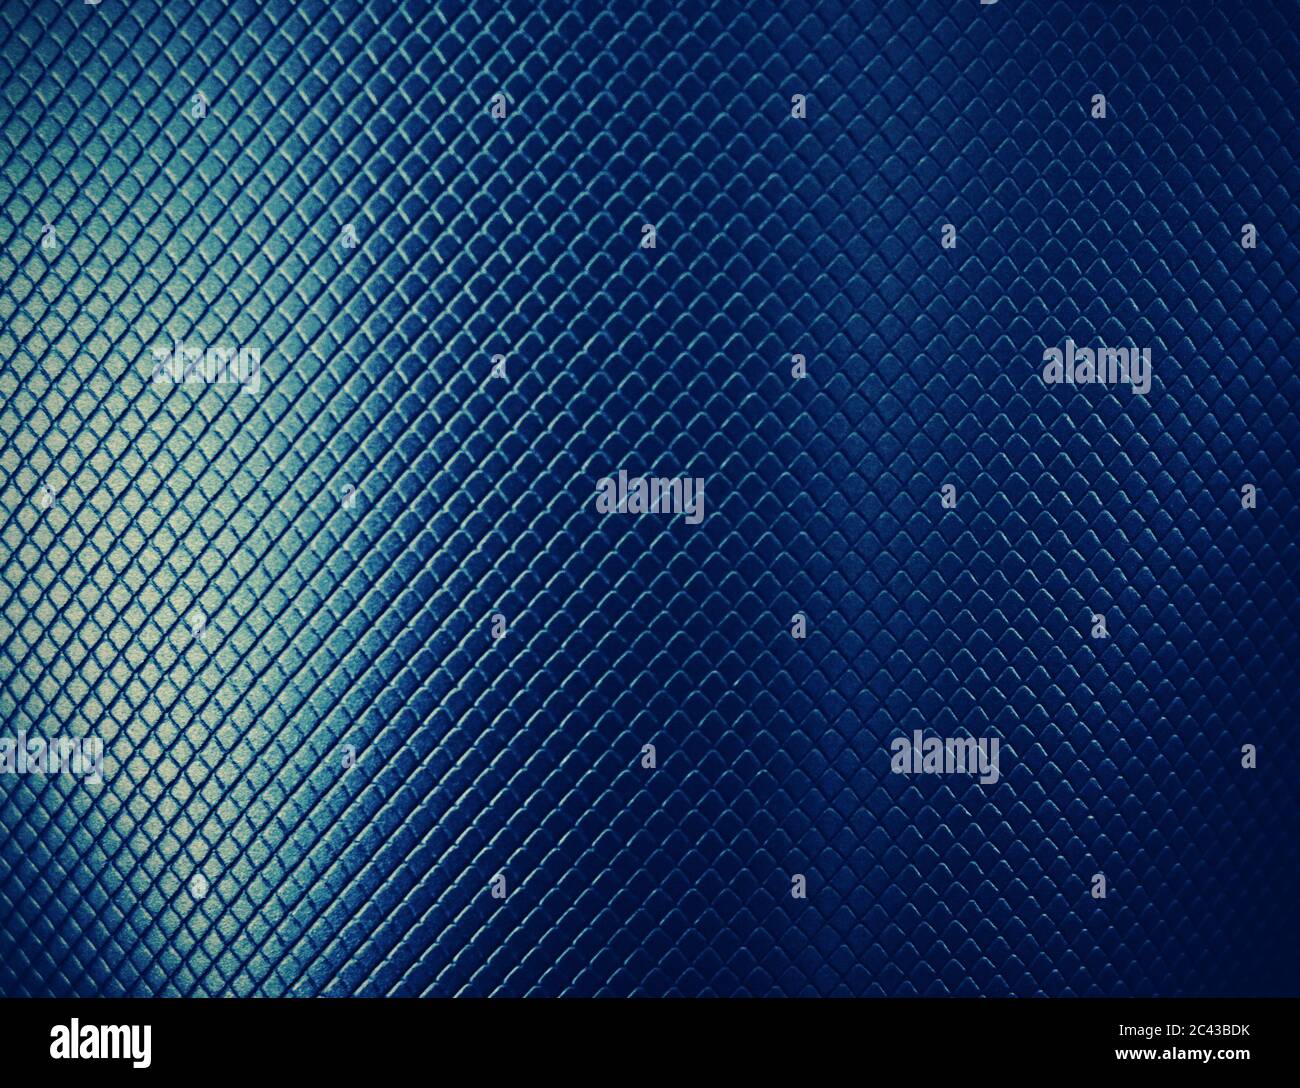 BLUE TEXTURE BACKGROUND FOR GRAPHIC DESIGN Stock Photo - Alamy